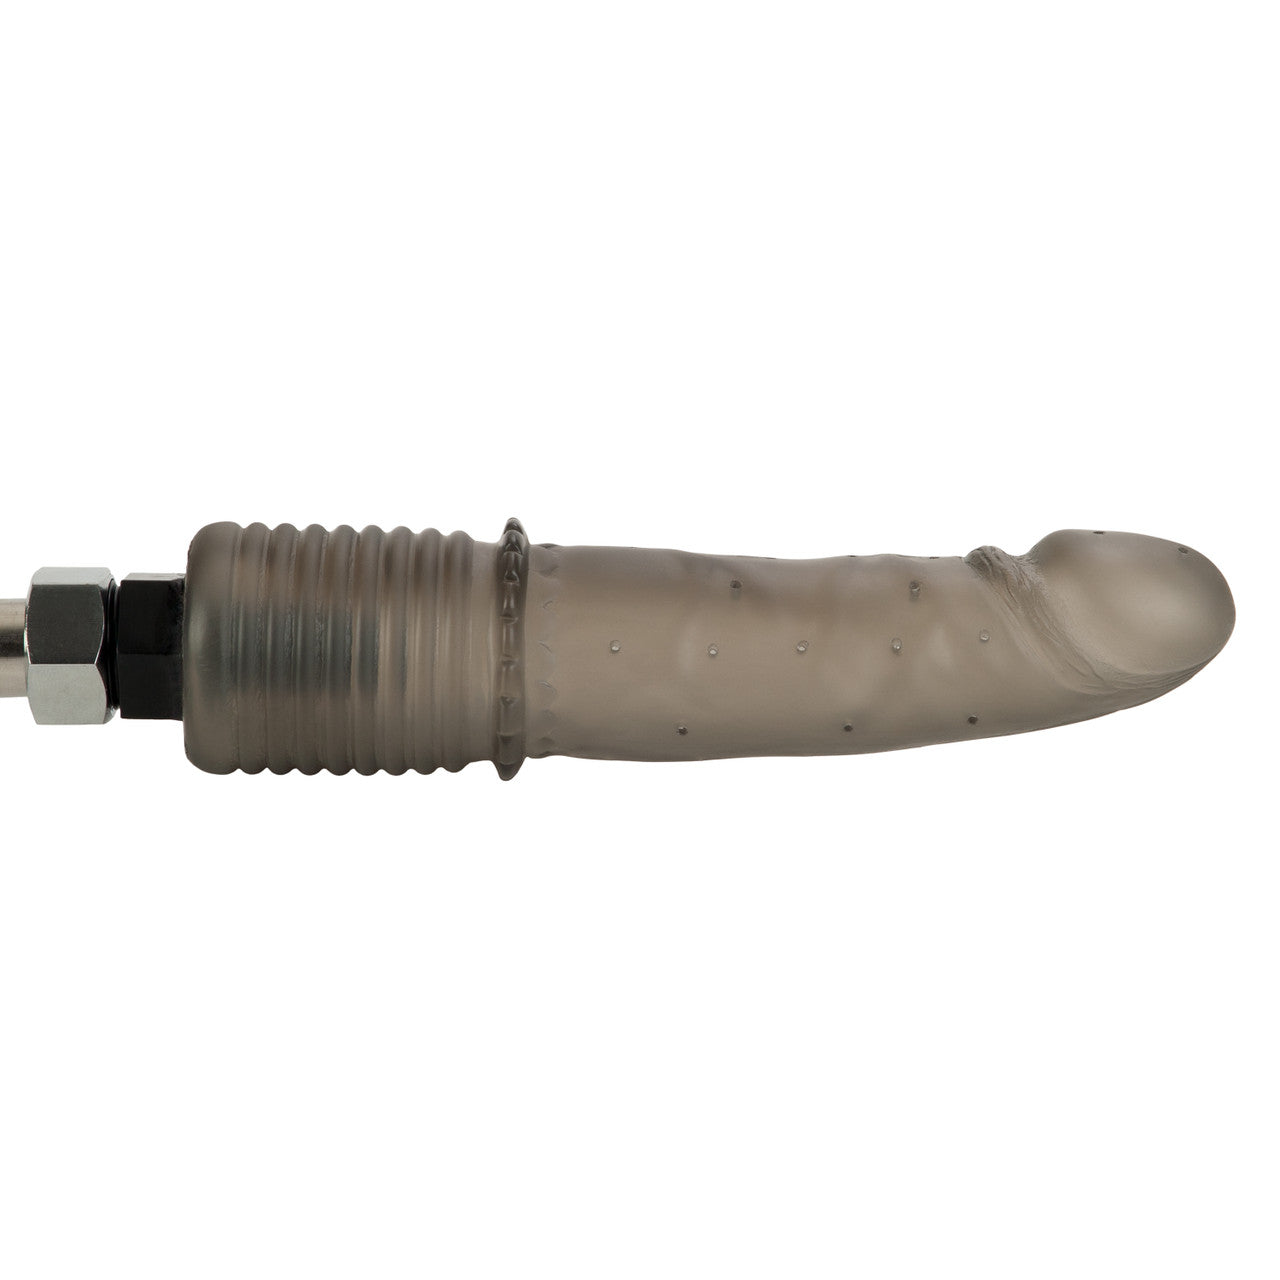 Colt Shower Shot - Thorn & Feather Sex Toy Canada